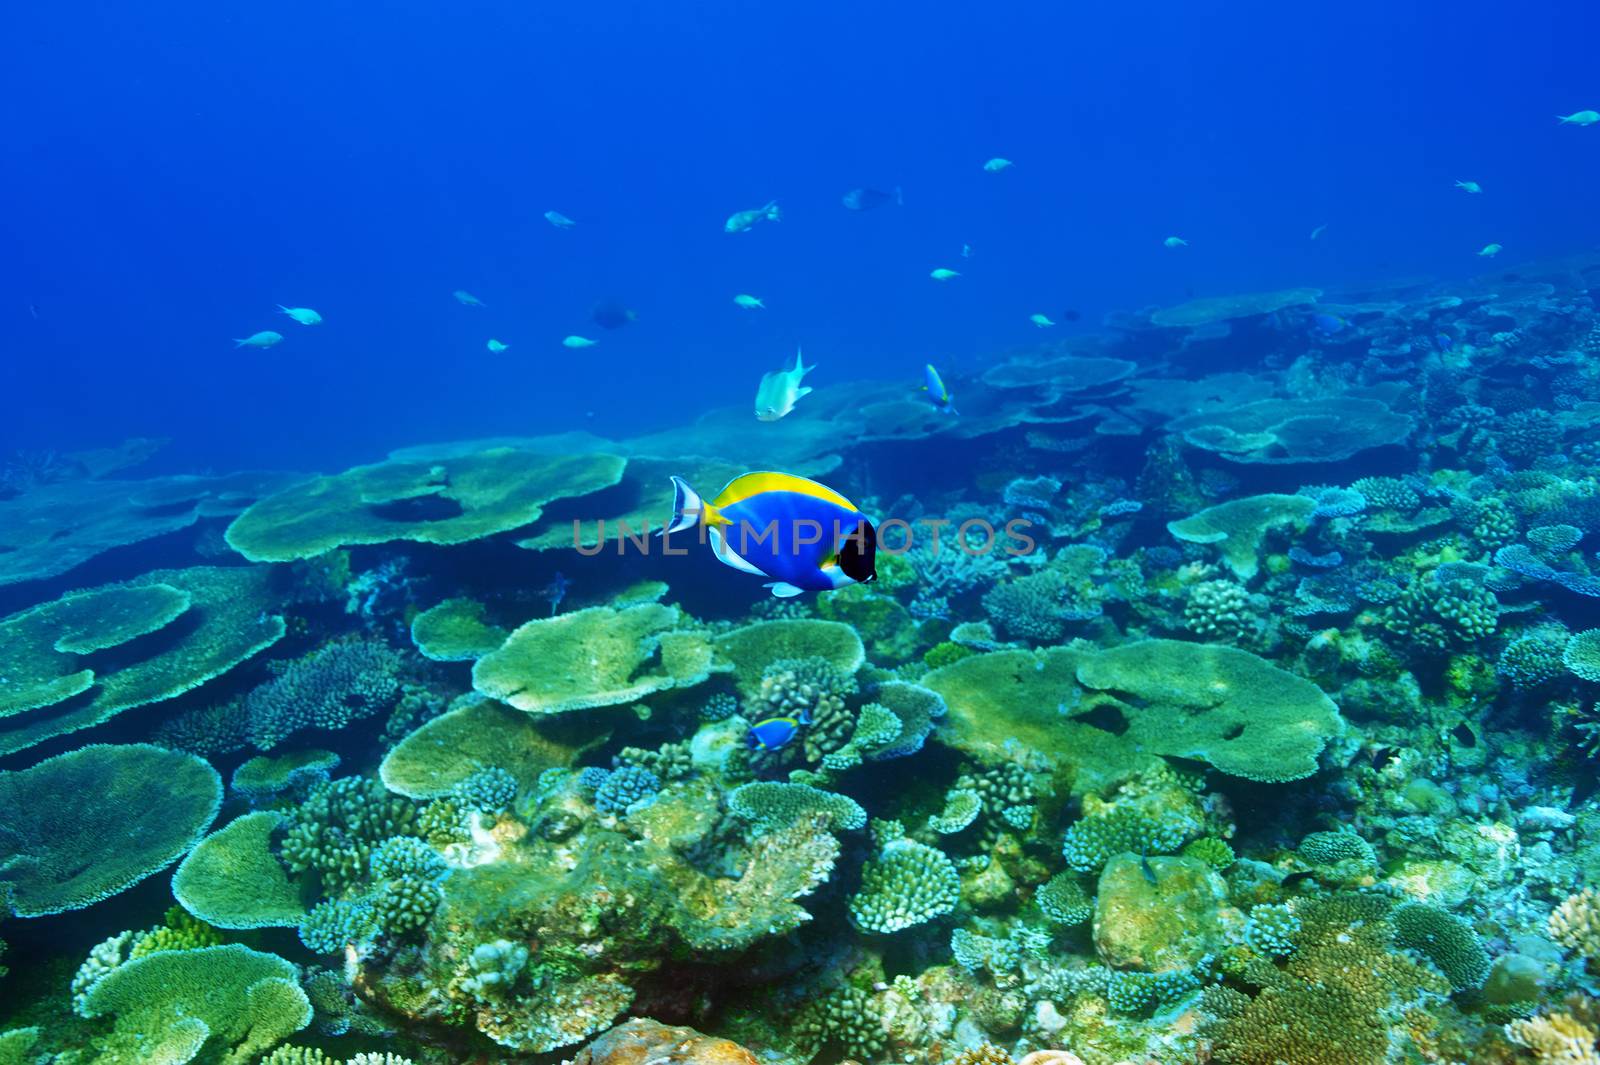 Coral reef at Maldives by haveseen